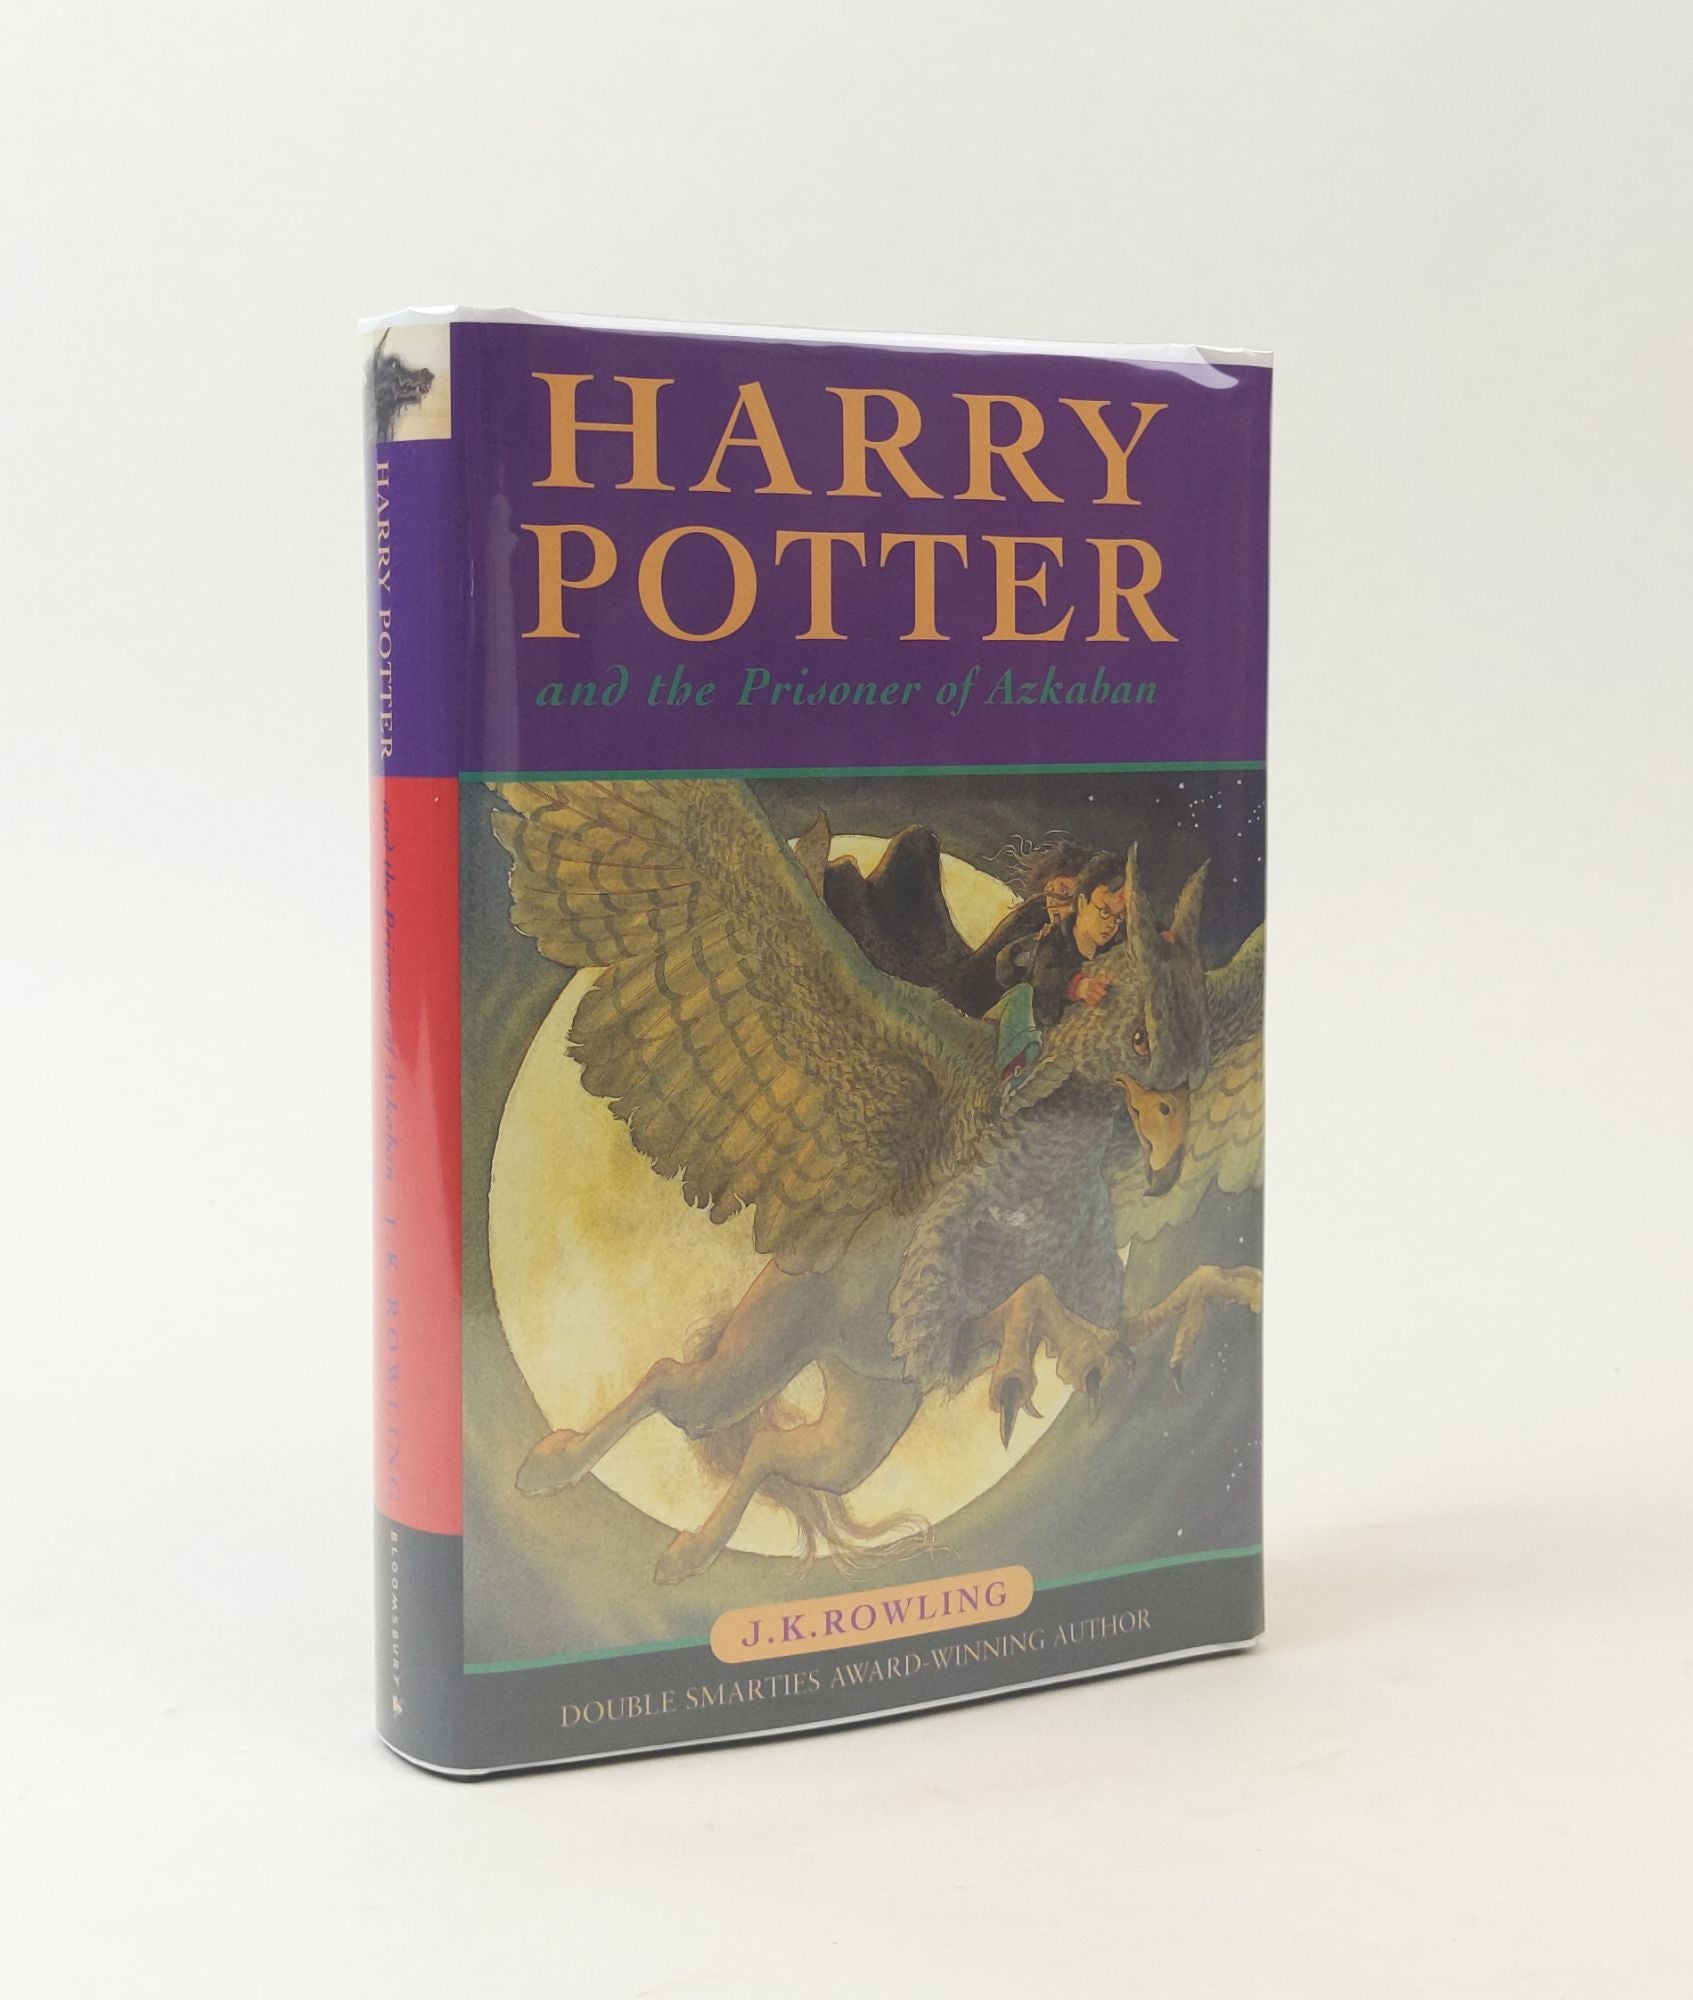 Product Image for HARRY POTTER AND THE PRISONER OF AZKABAN